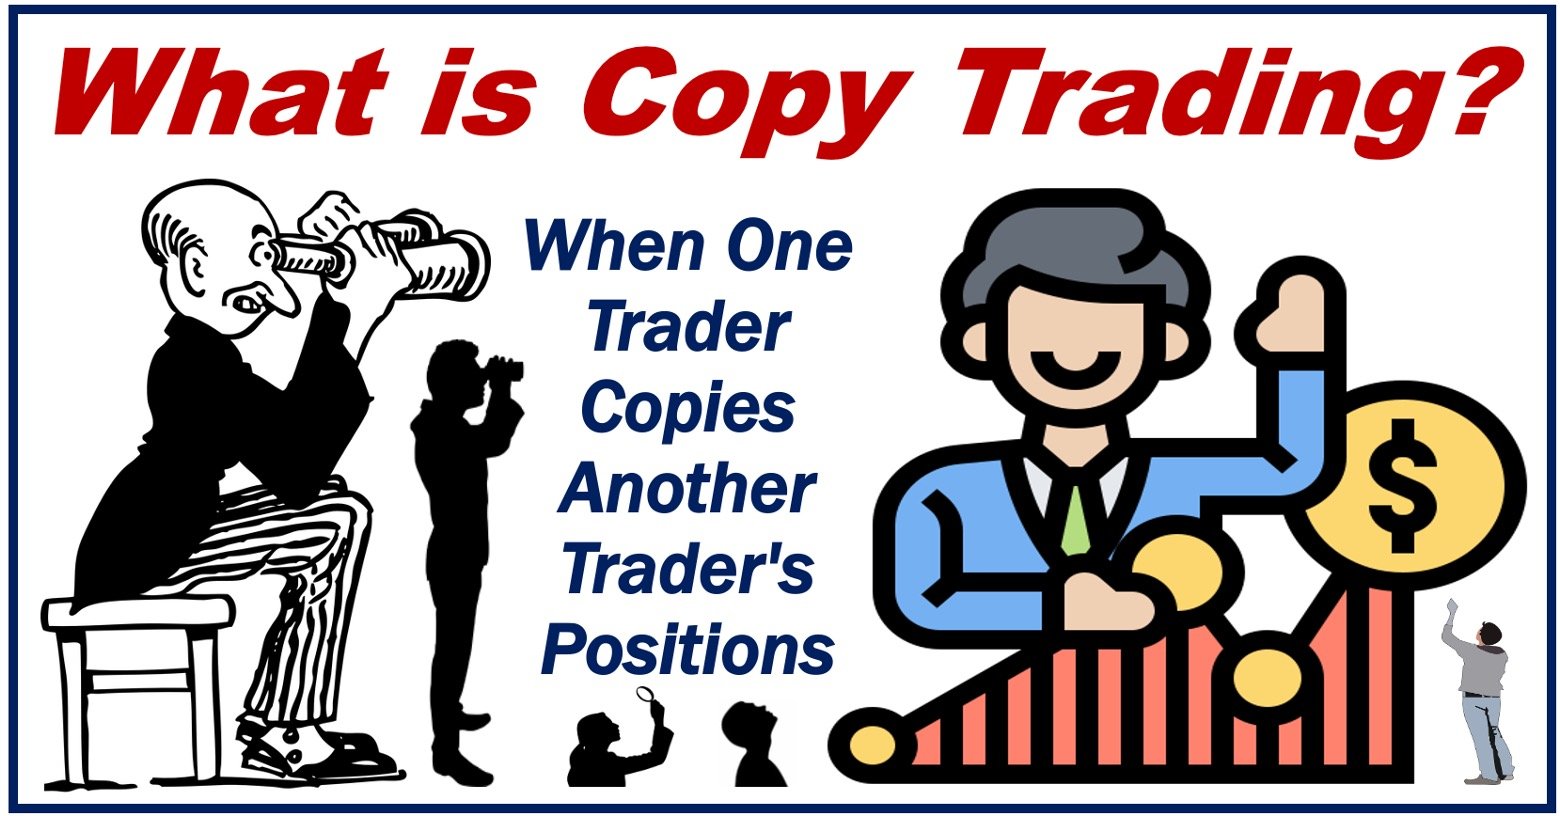 Image explaining what copy trading is.